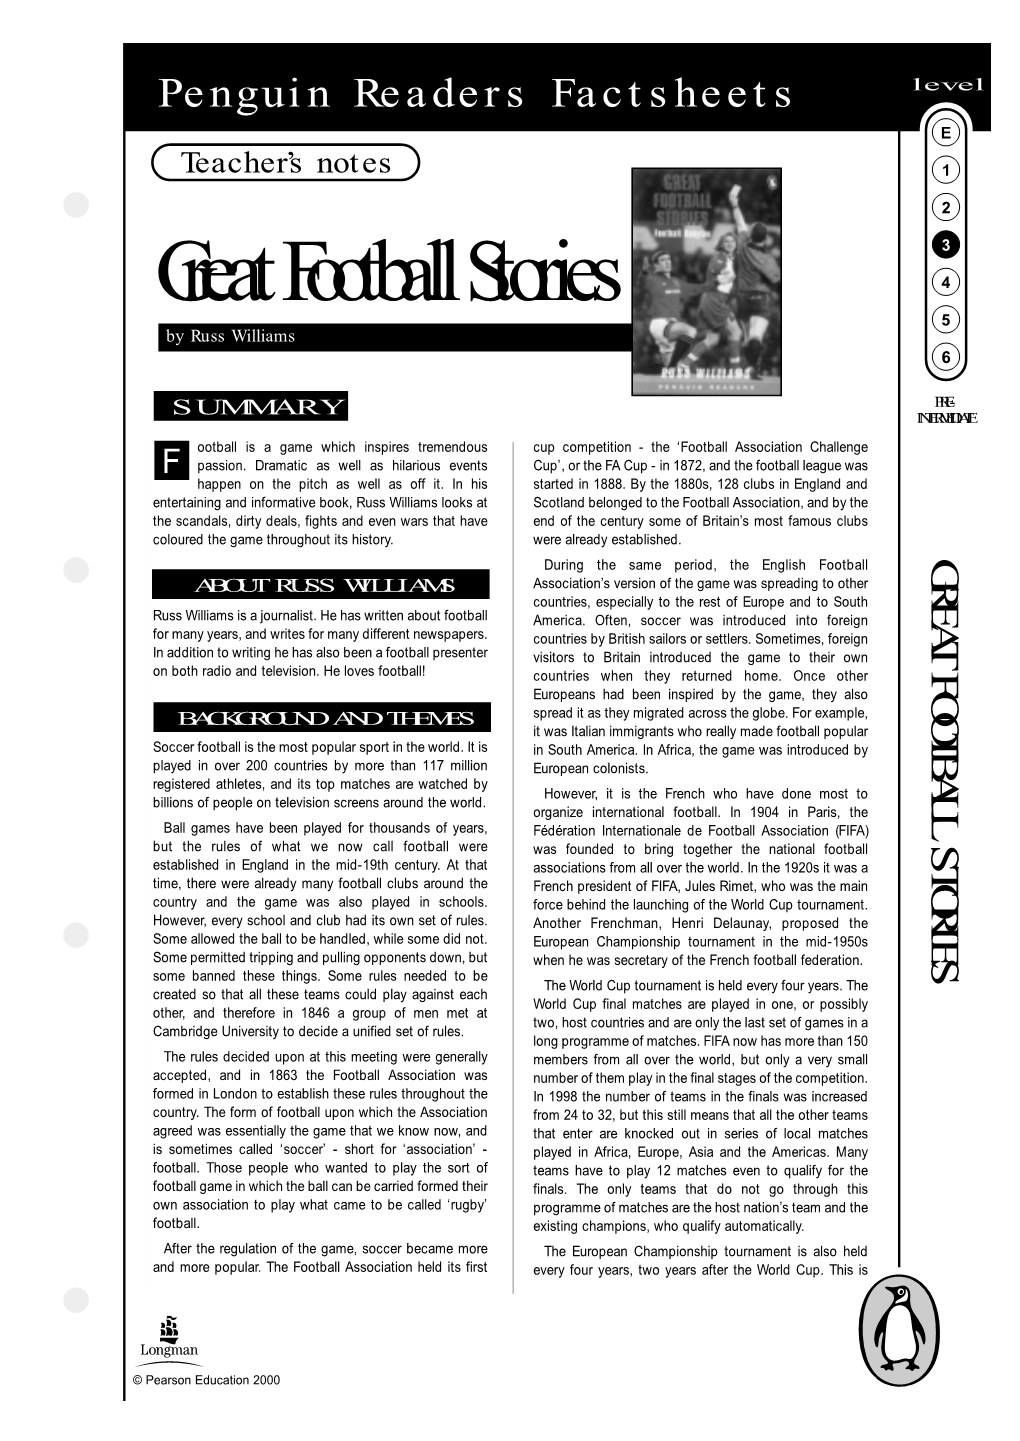 Great Football Stories 4 5 by Russ Williams 6